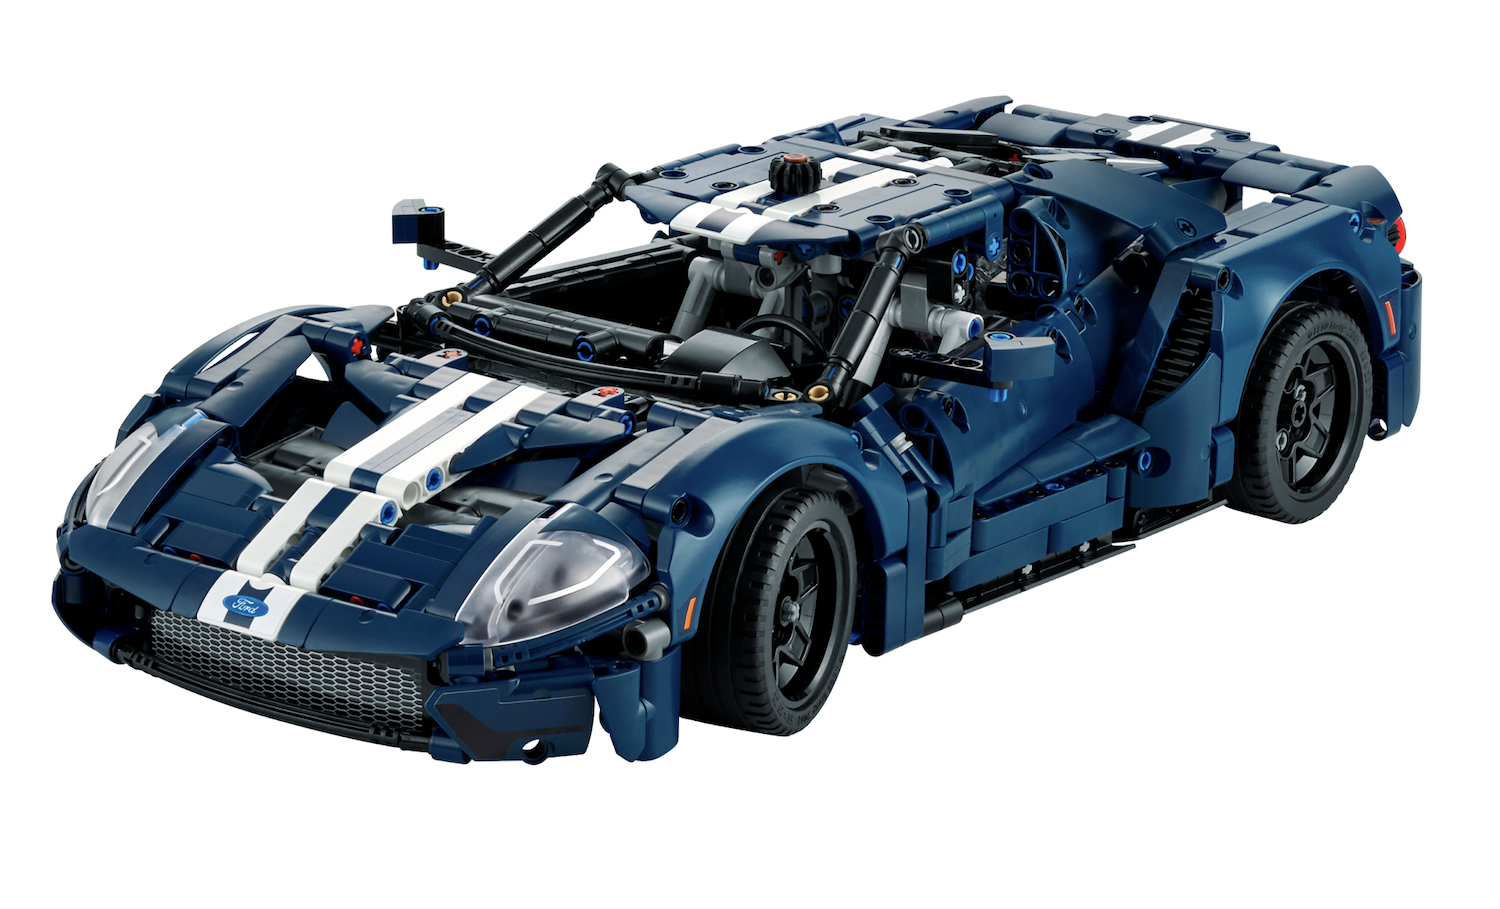 https://fordauthority.com/wp-content/uploads/2023/01/2022-Ford-GT-Lego-Technic-Kit-Exterior-001-Front-Three-Quarters.png